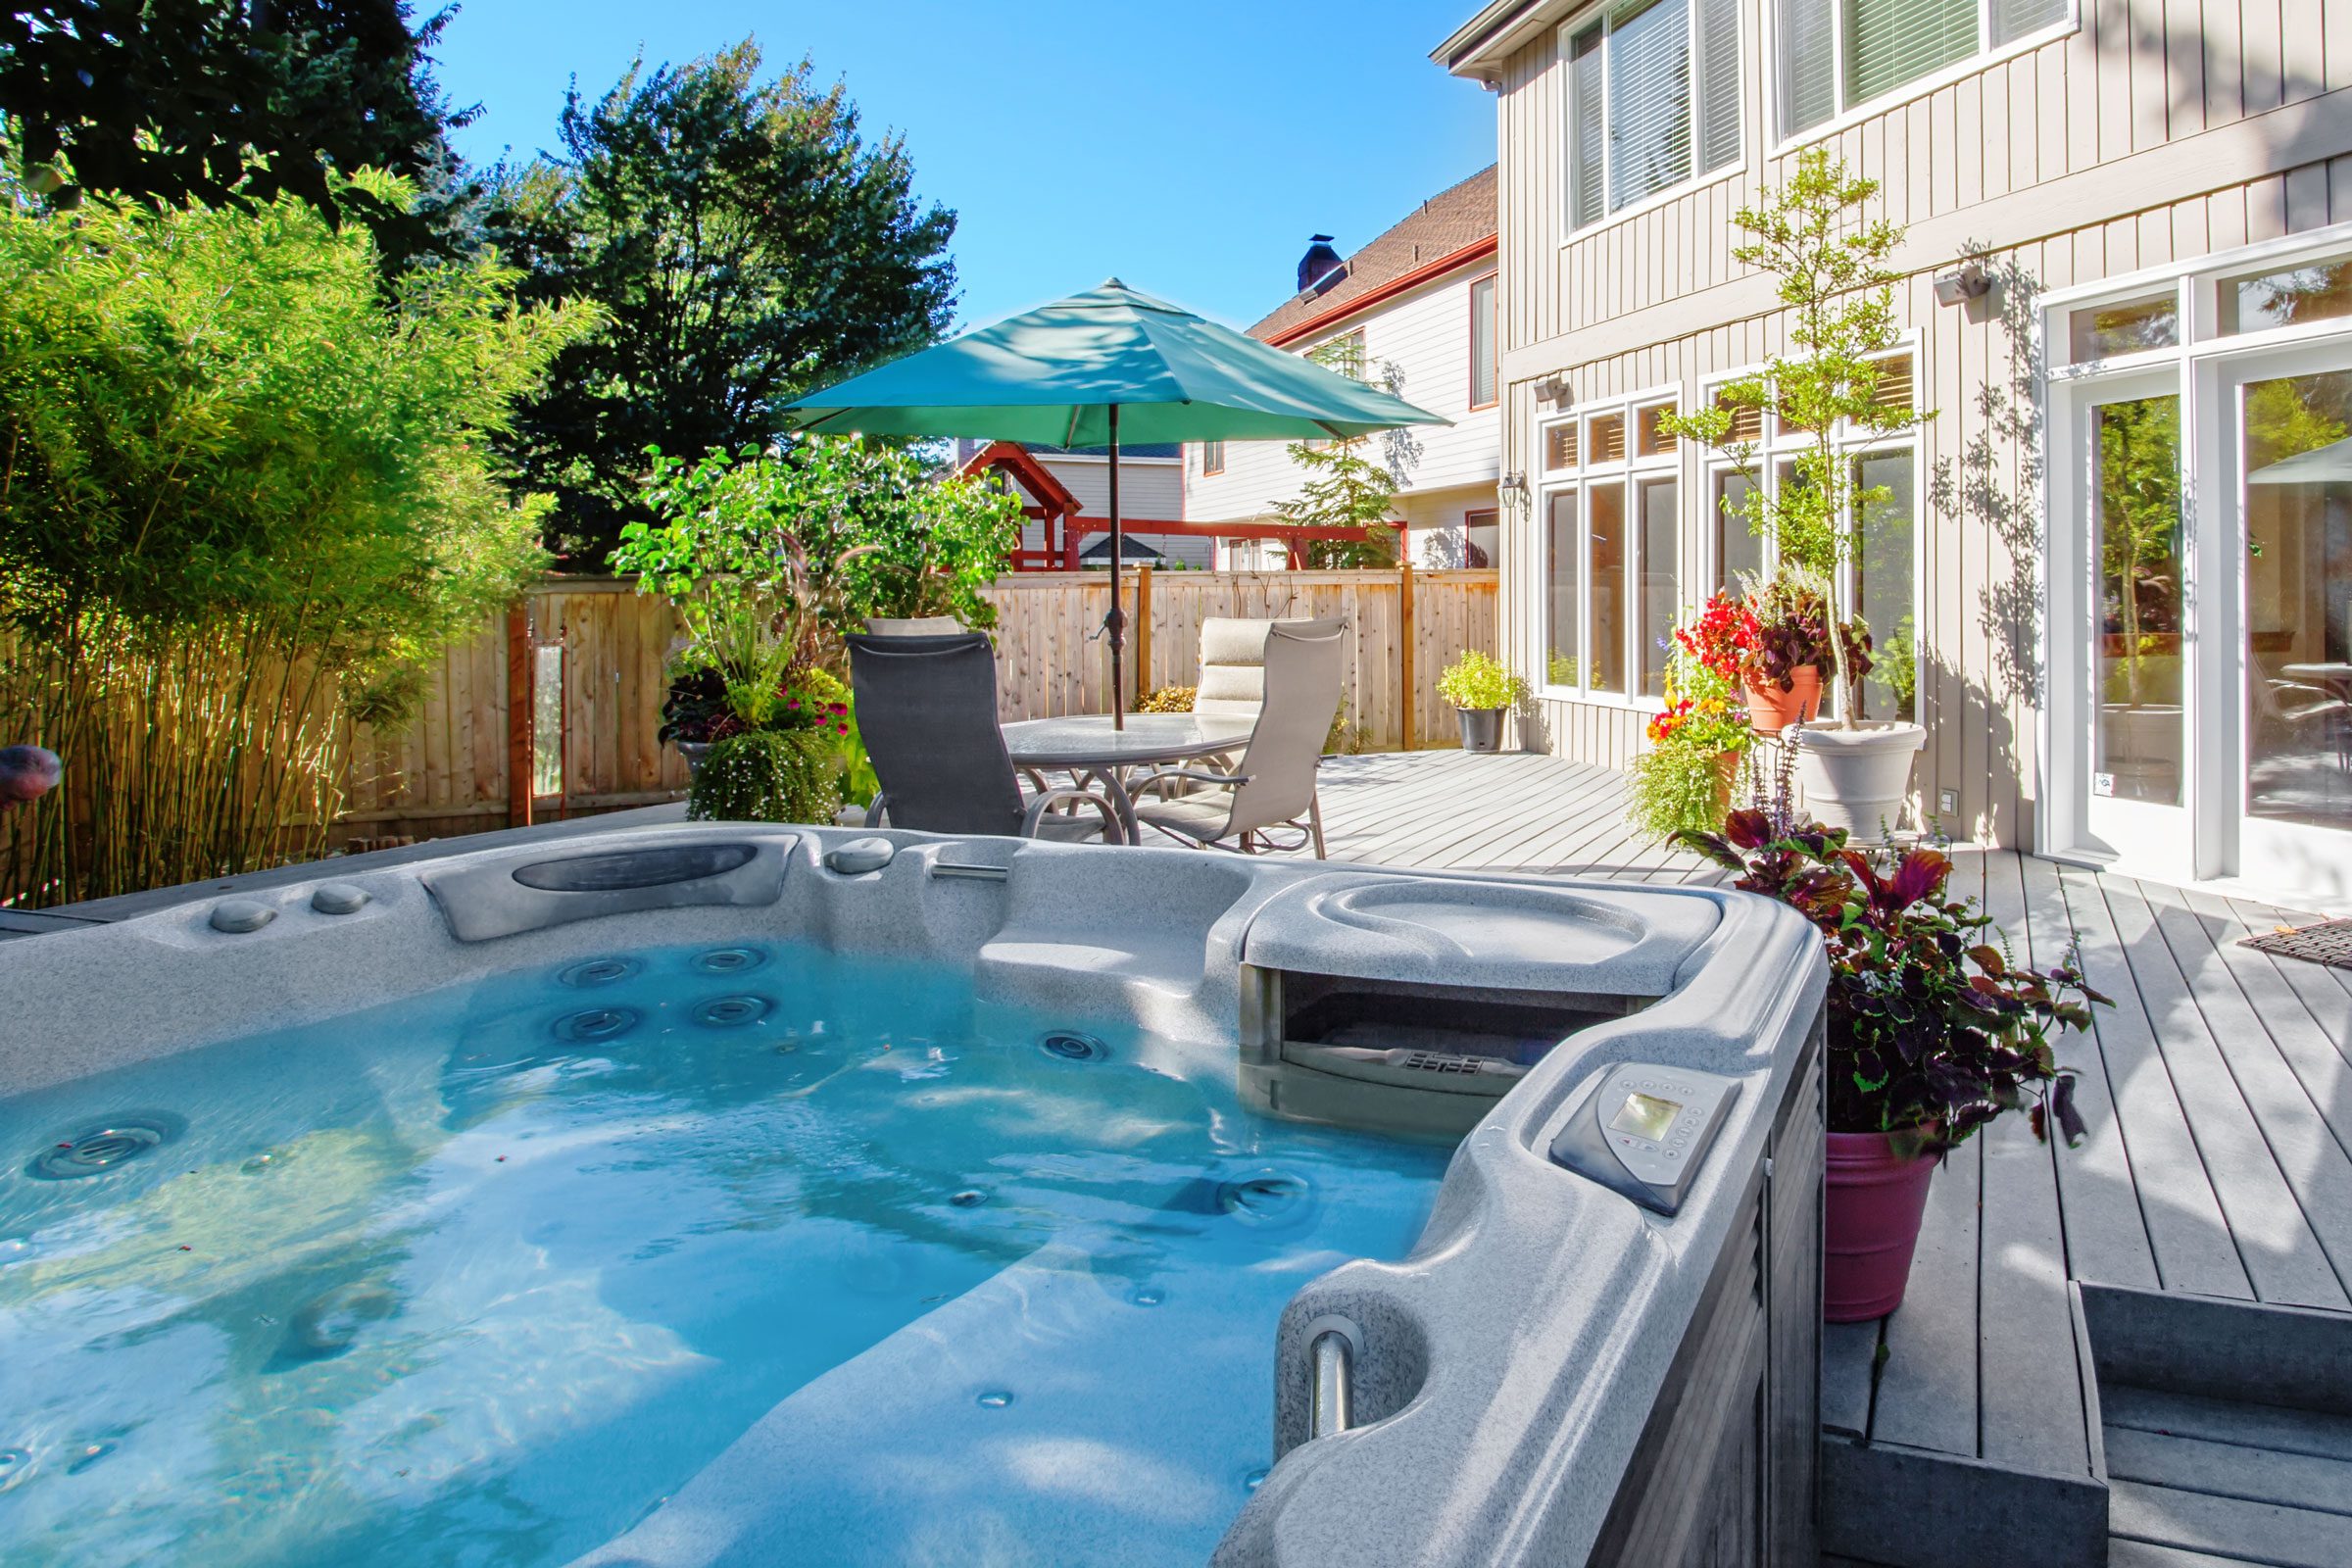 Will a Hot Tub Increase My Home's Value? | The Family Handyman